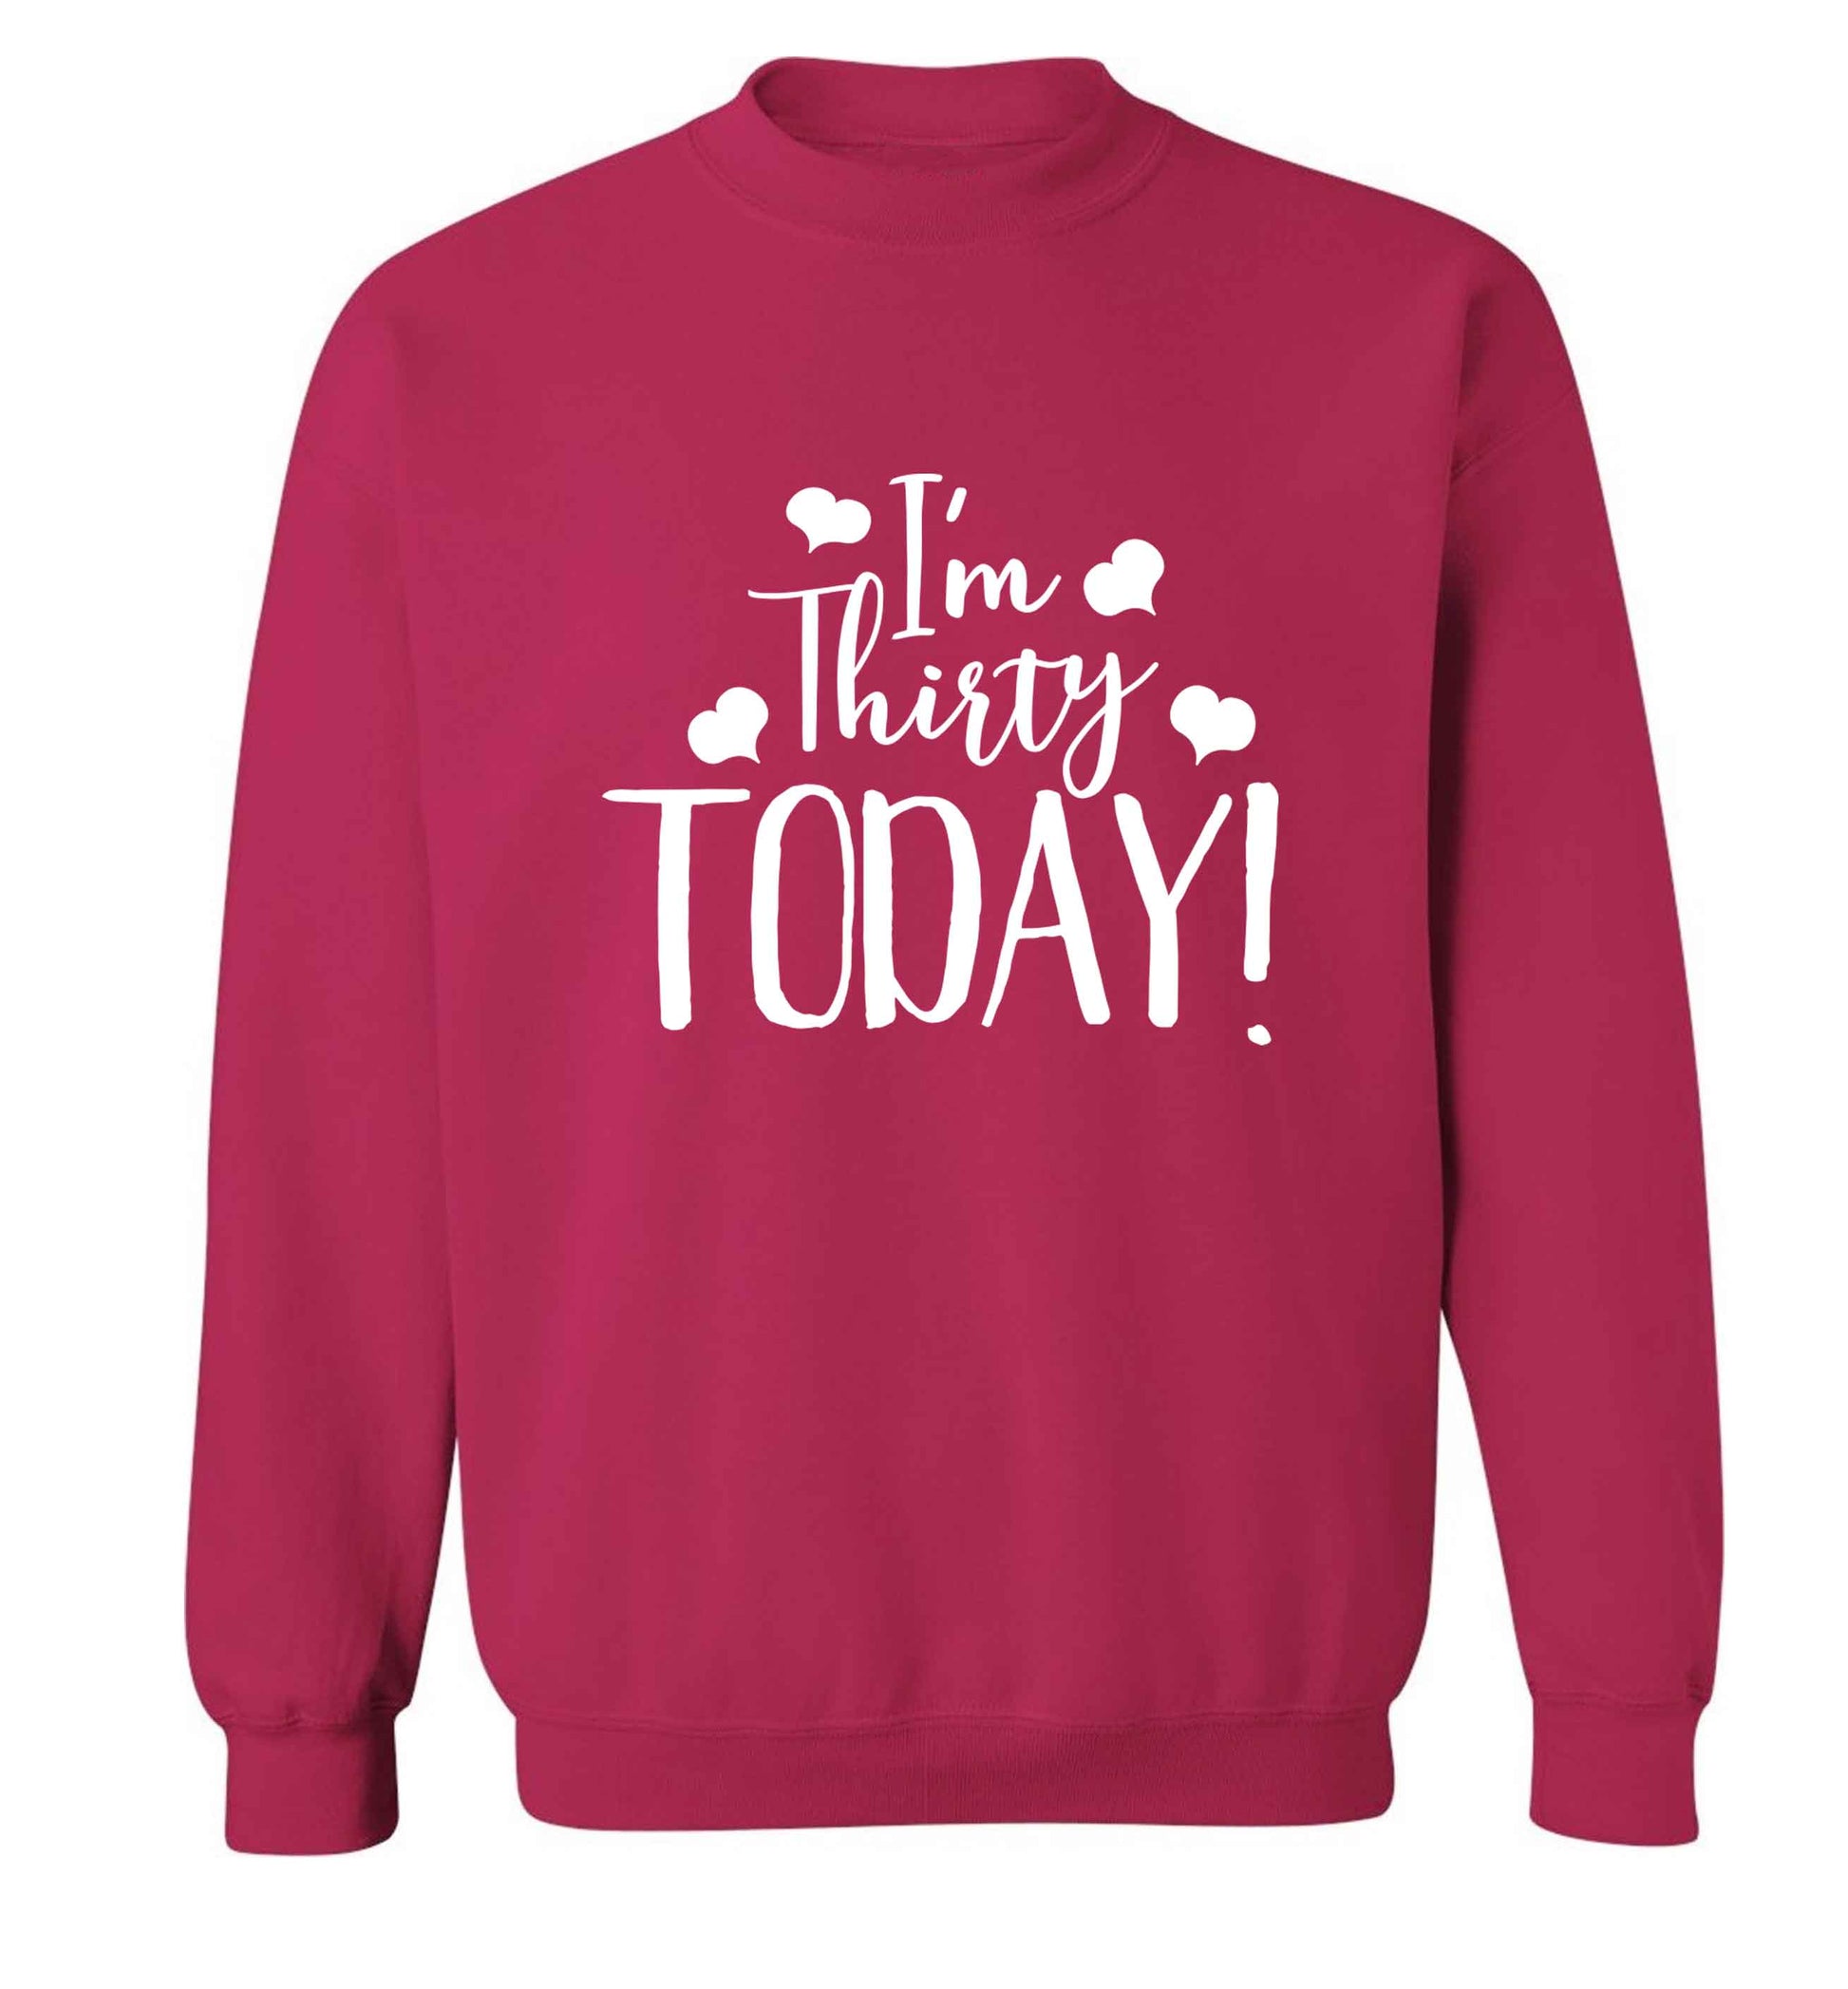 I'm thirty today! adult's unisex pink sweater 2XL